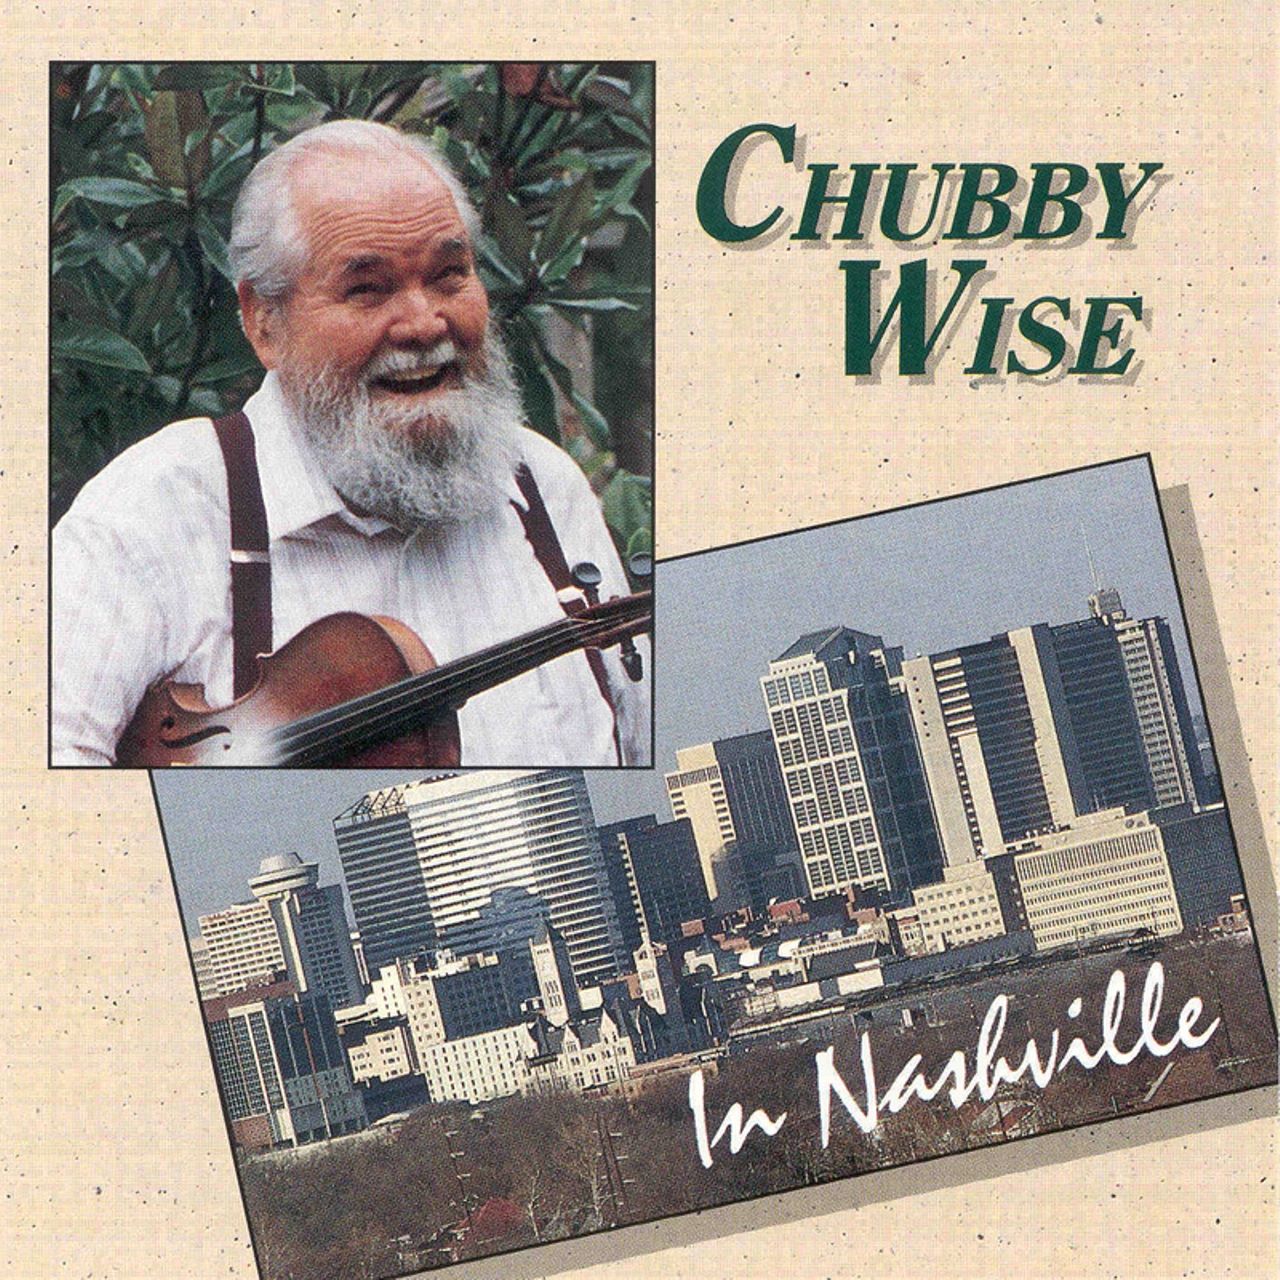 Chubby Wise - In Nashville cover album